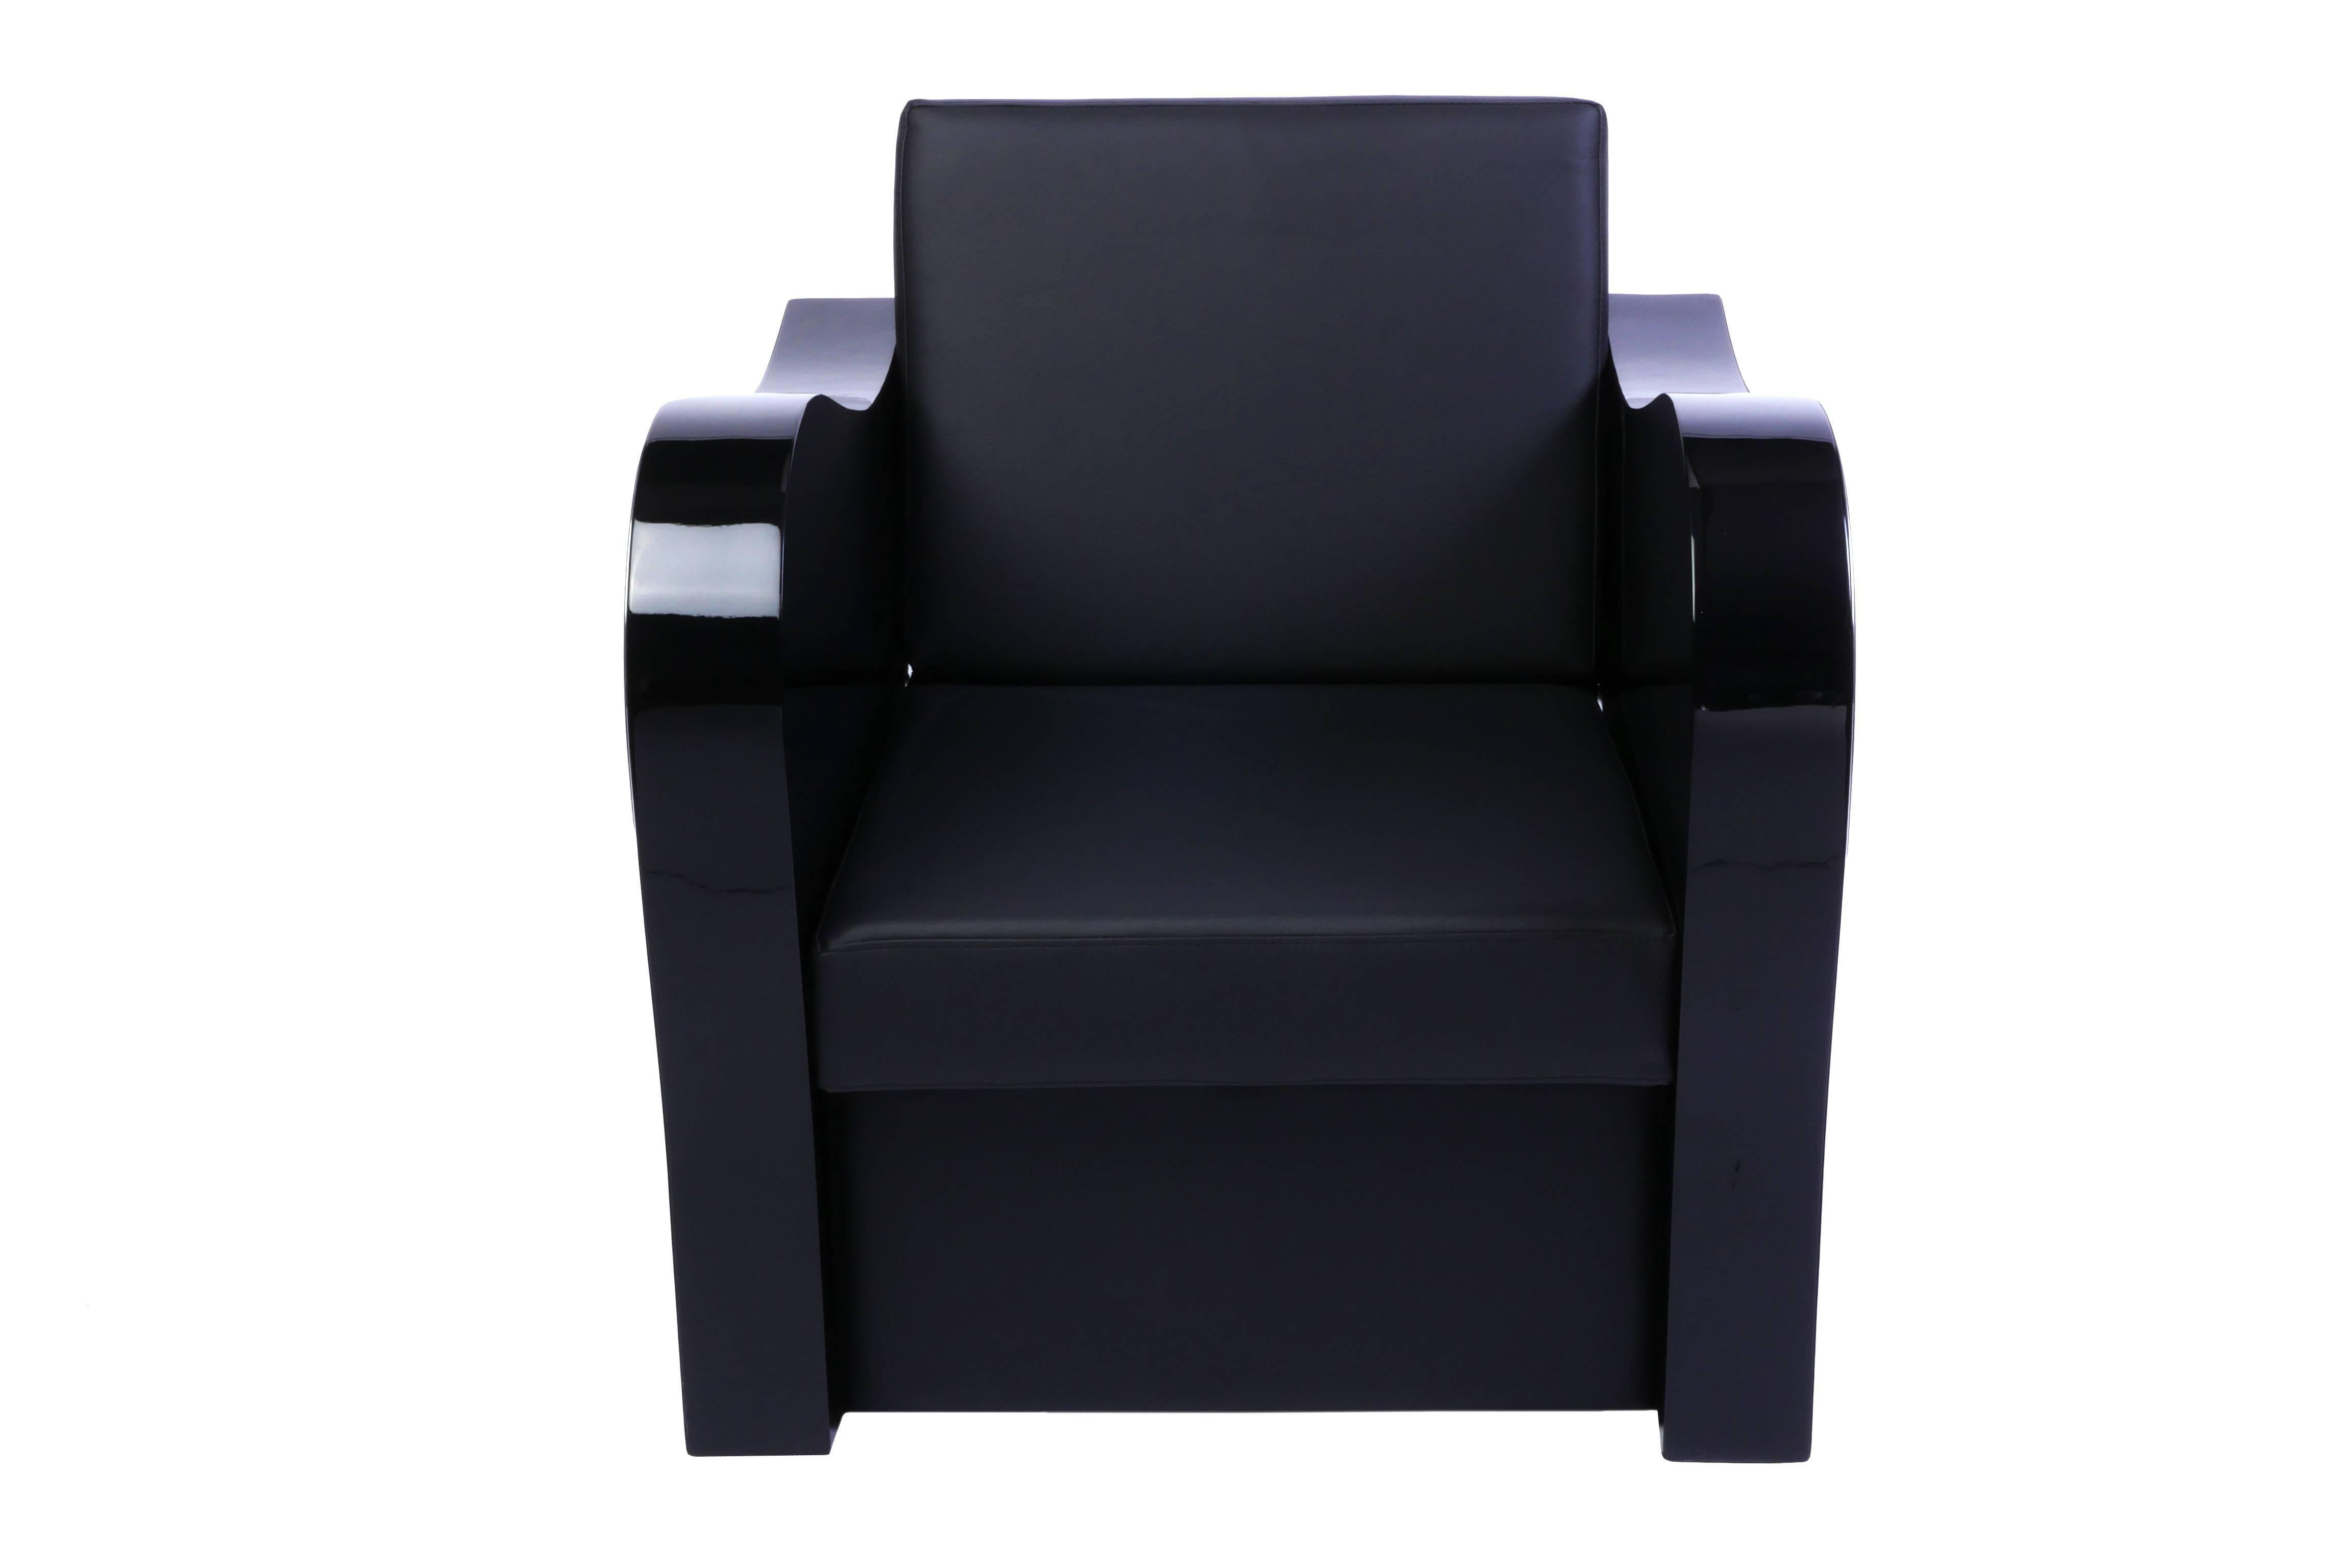 This chic Art Deco style armchair features chrome-line detailed swung armrests, with a beautiful black leather upholstery and finished in a high gloss black lacquer.

Two available.